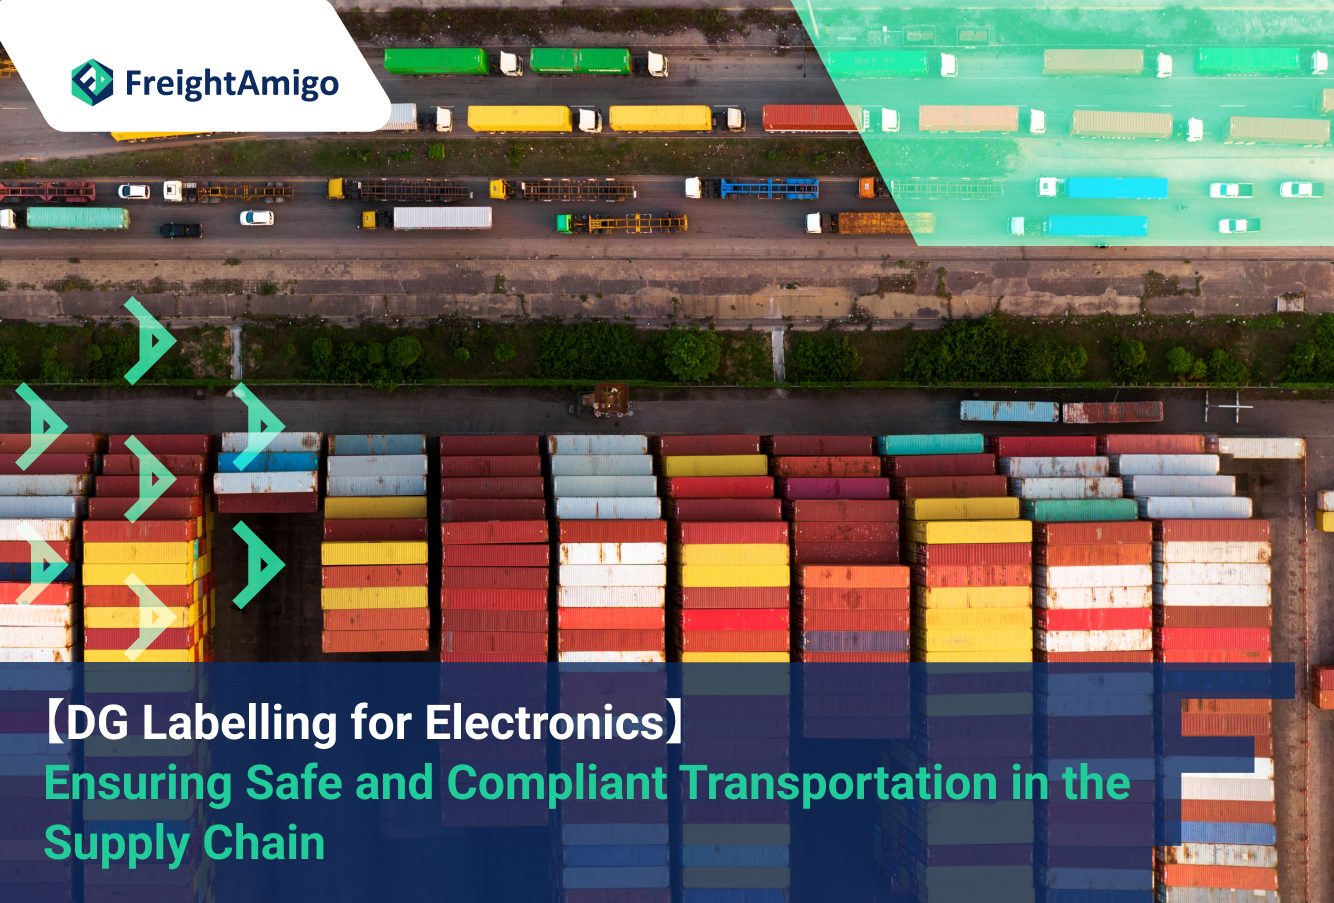 【DG Labelling for Electronics】 Ensuring Safe and Compliant Transportation in the Supply Chain